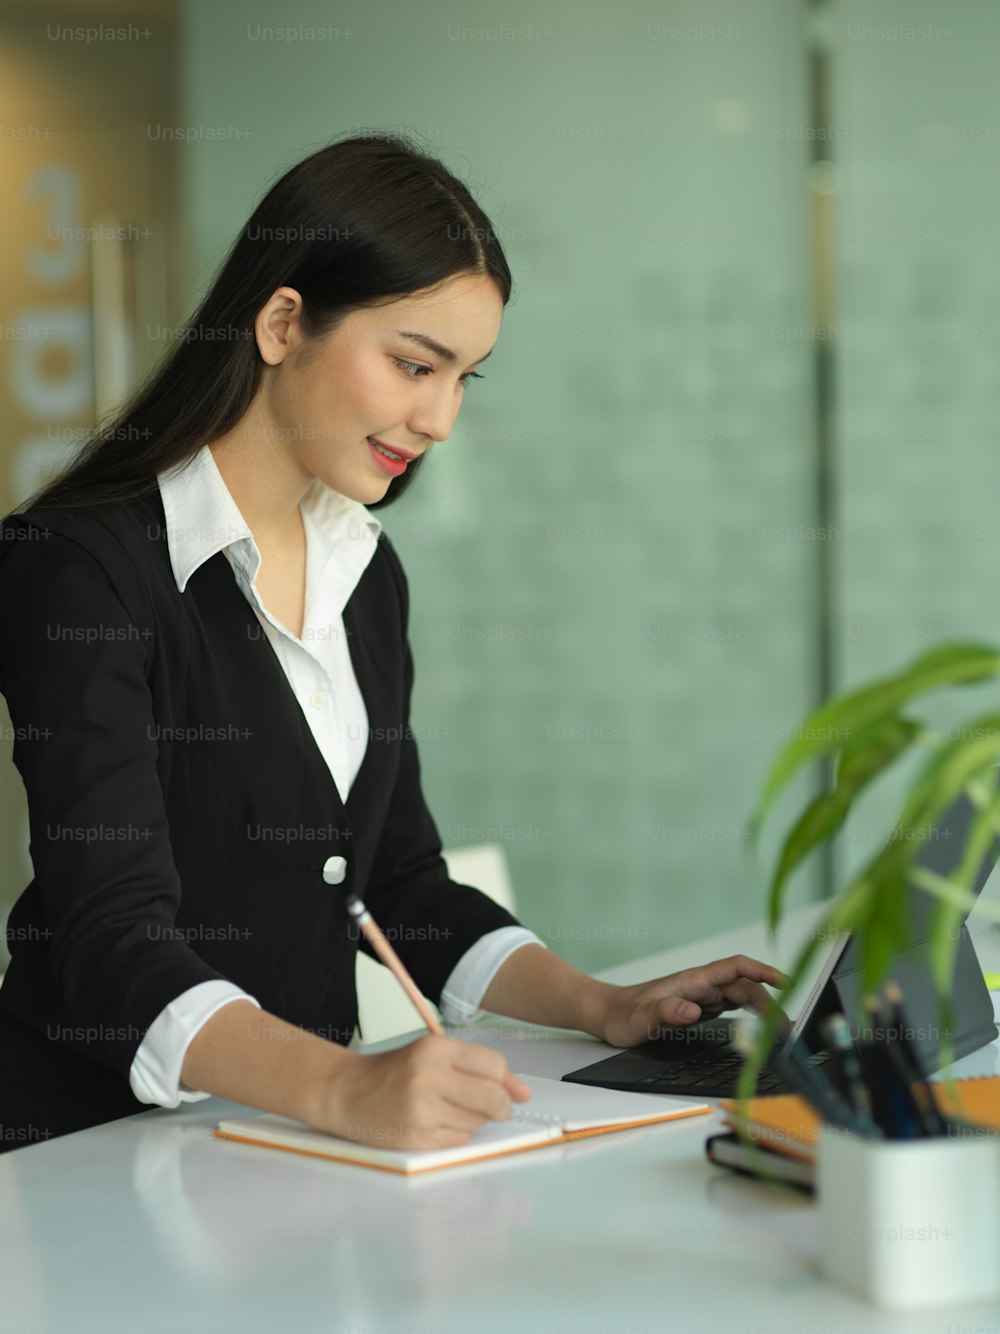 Portrait of businesswoman in black suit working with digital tablet and stationery in office room